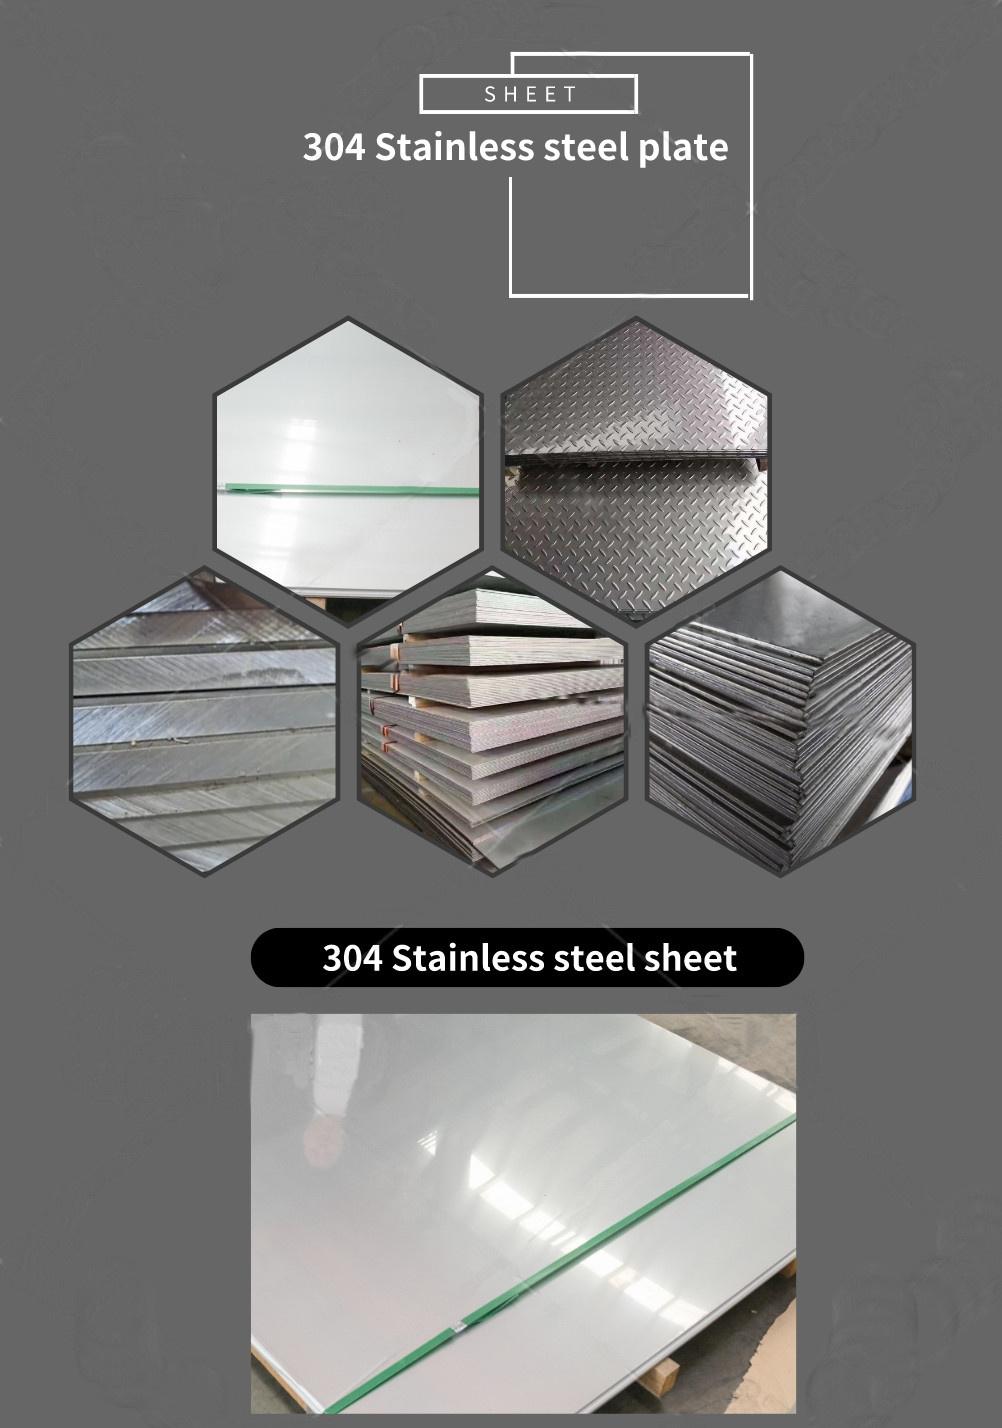 ASTM/GB/JIS 202 310S Hot Rolled Stainless Steel Plate for Boat Board